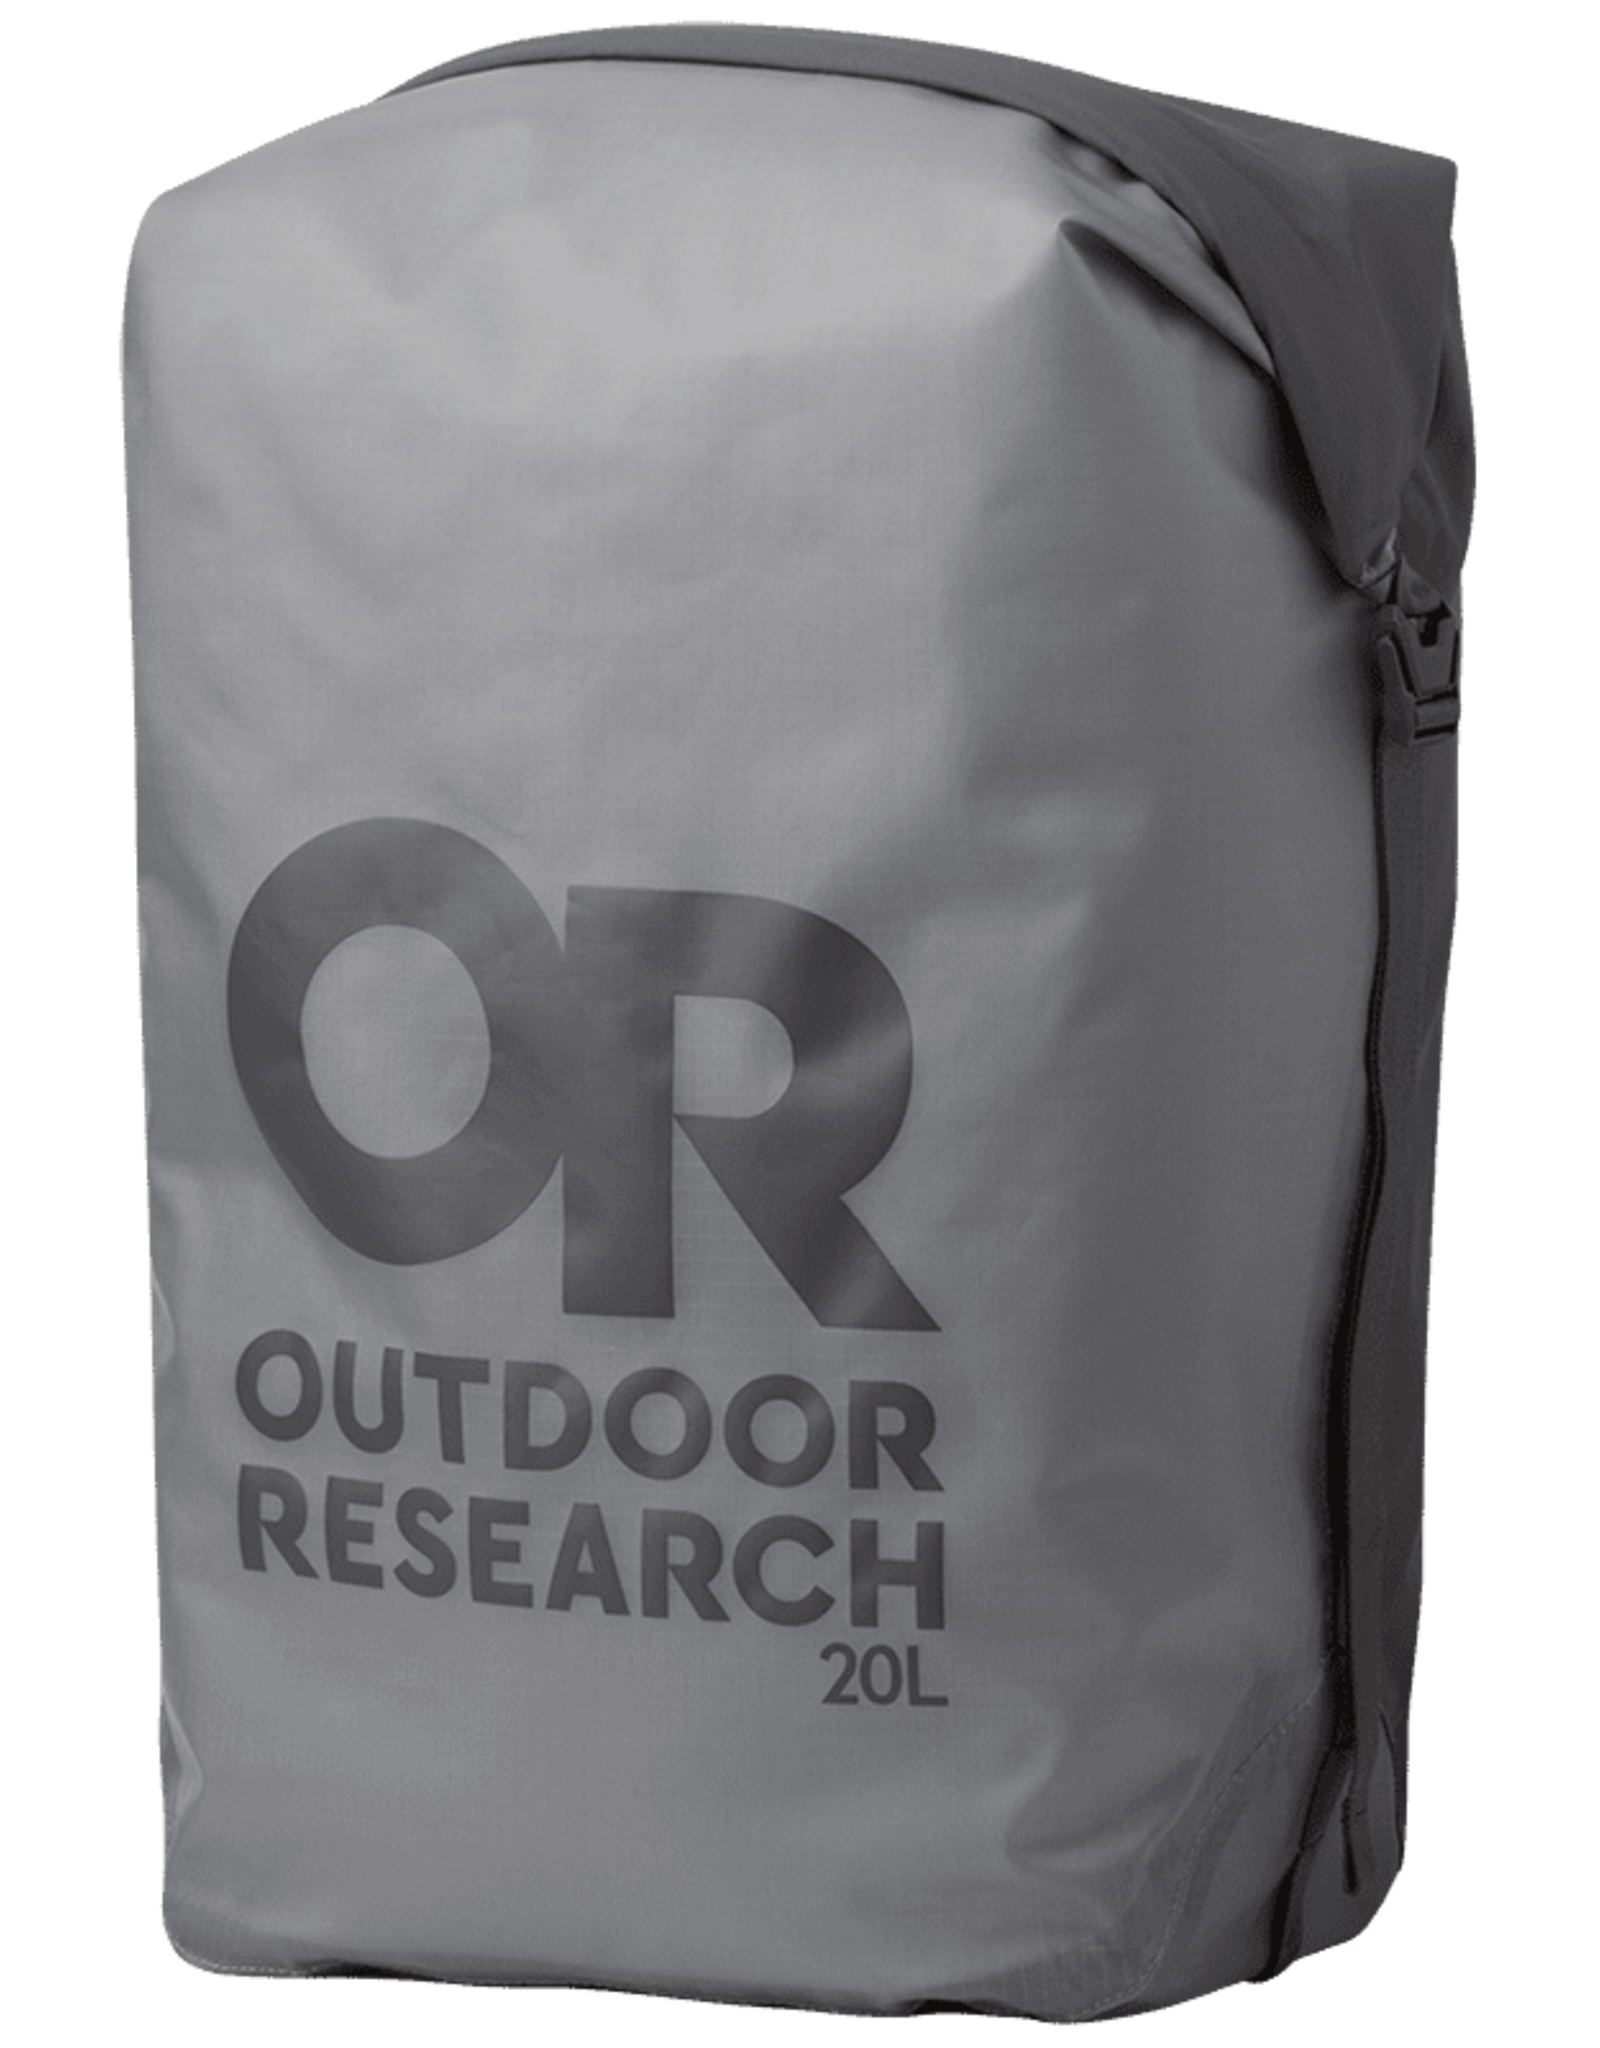 OUTDOOR RESEARCH AIRPURGE COMPRESSION DRY BAG